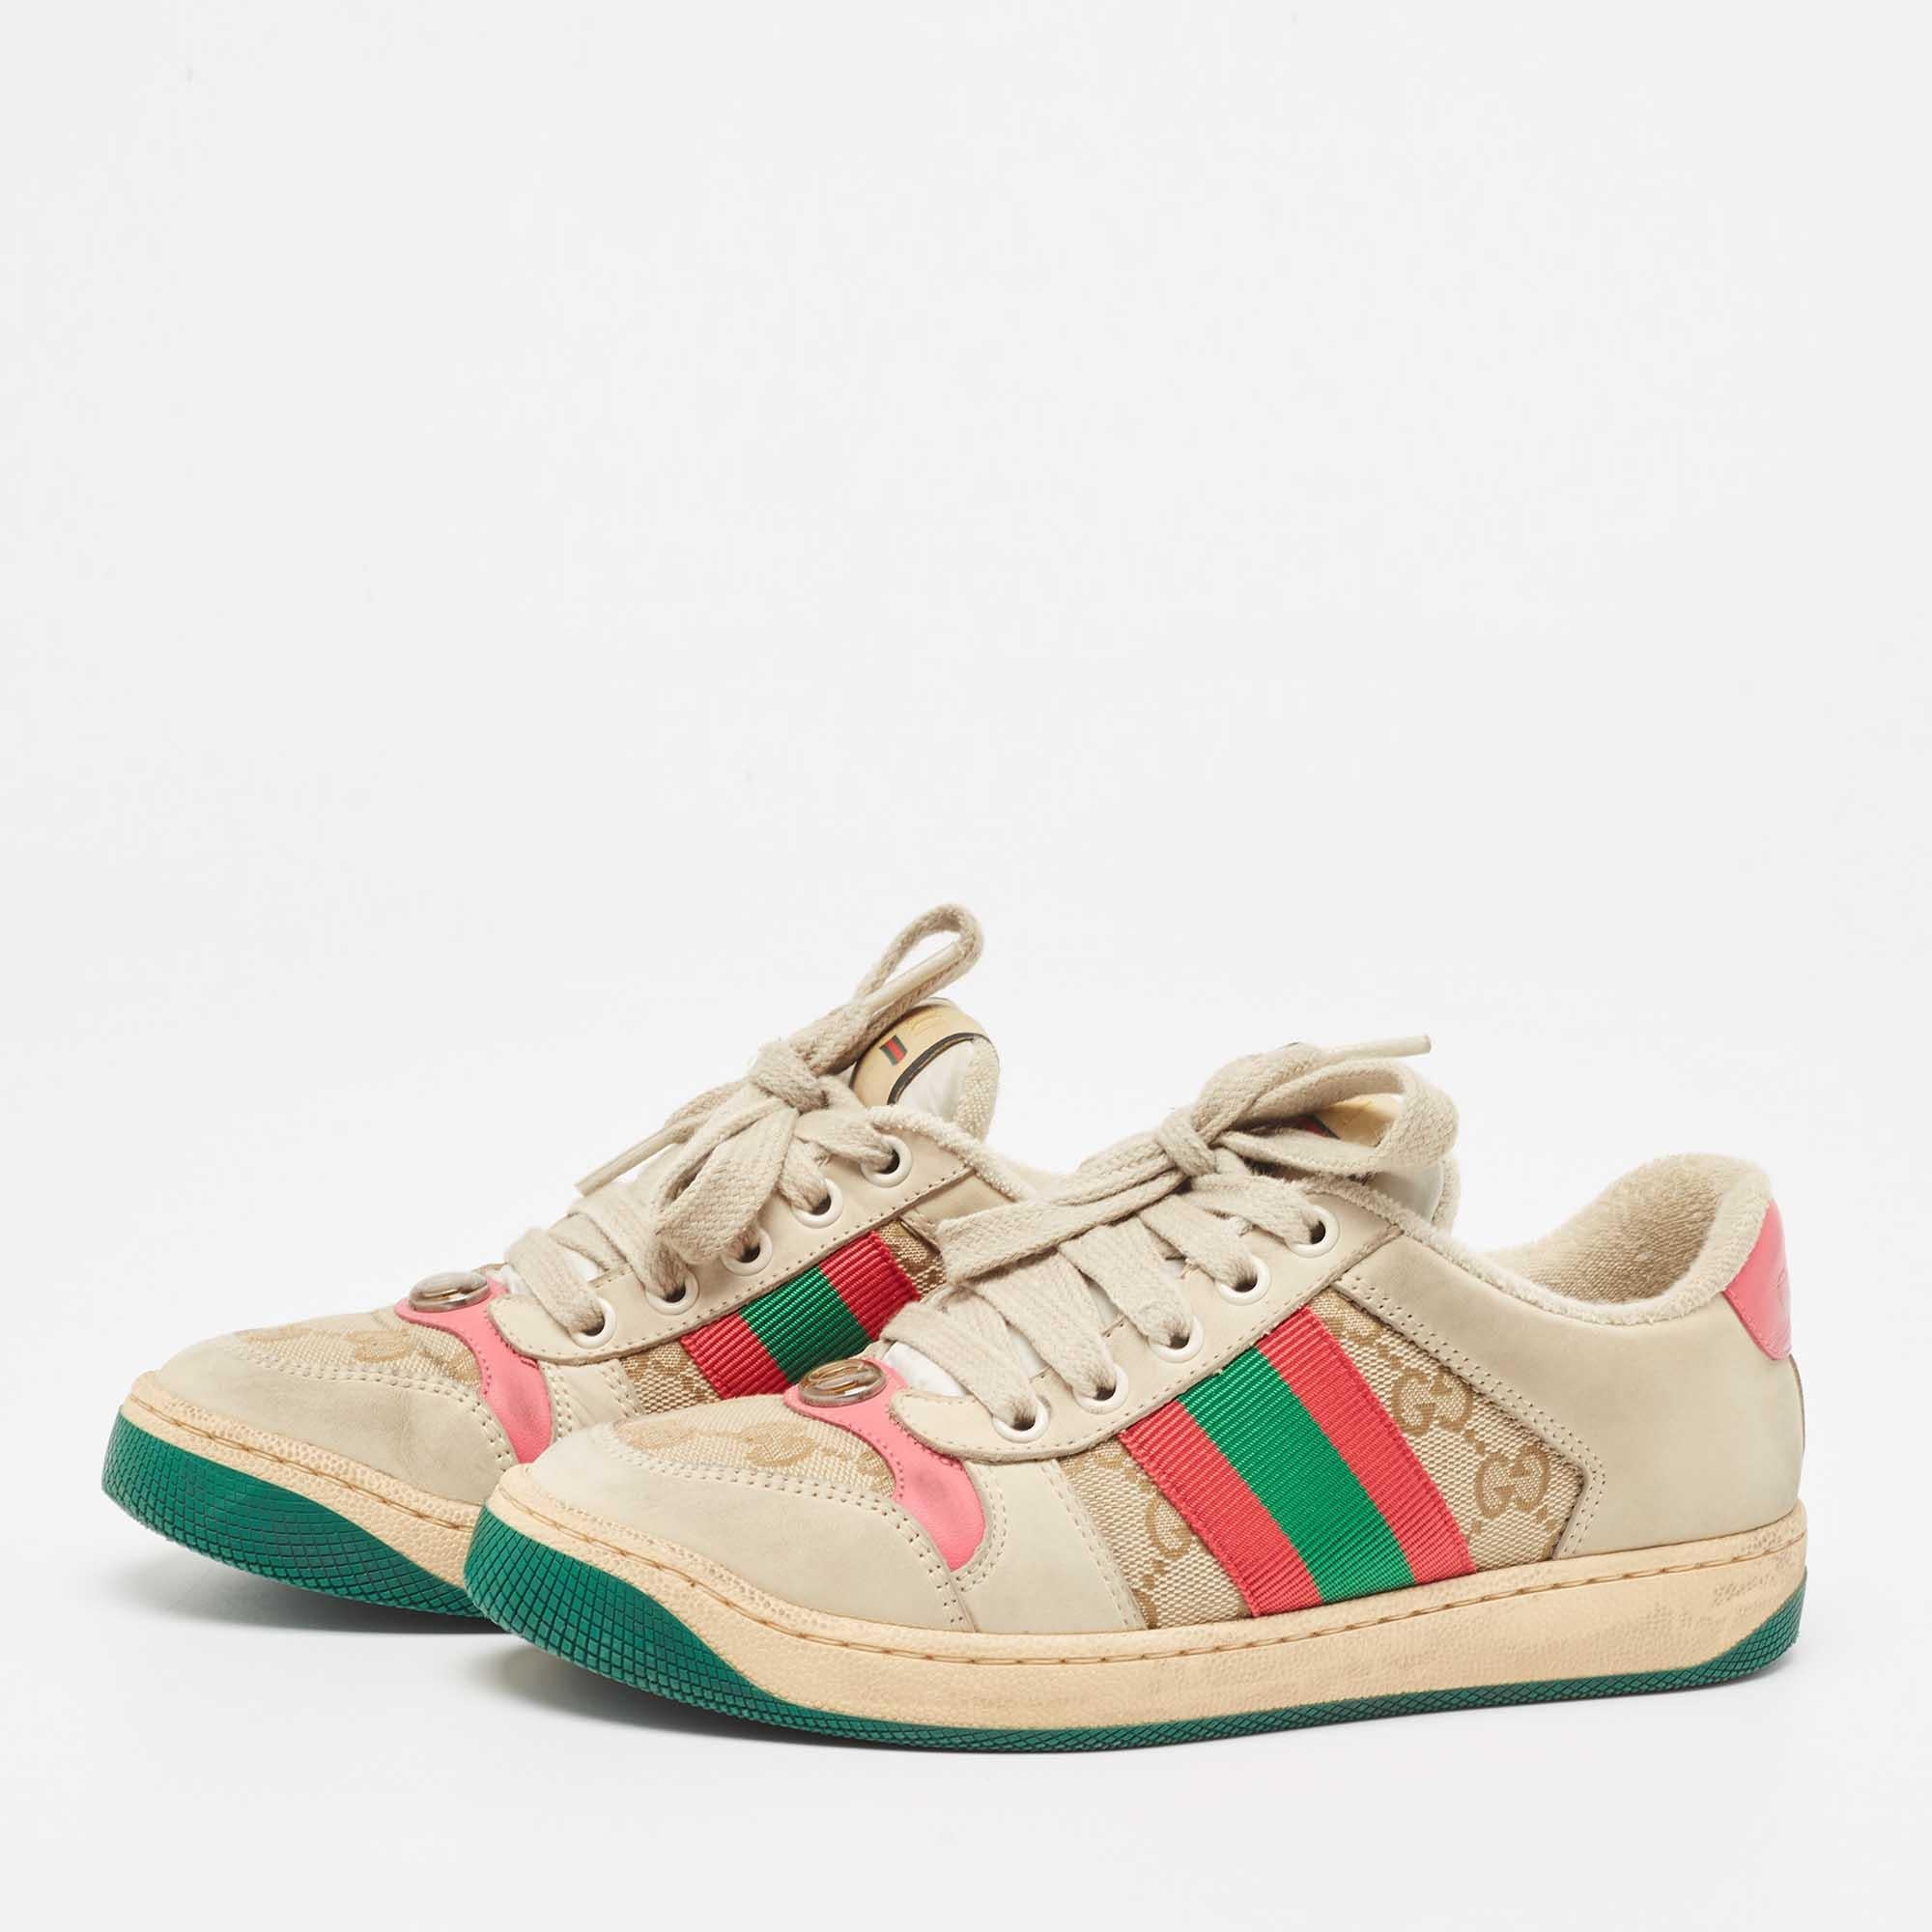 Gucci Grey/Pink Nubuck Leather Screener Sneakers Size 34 3